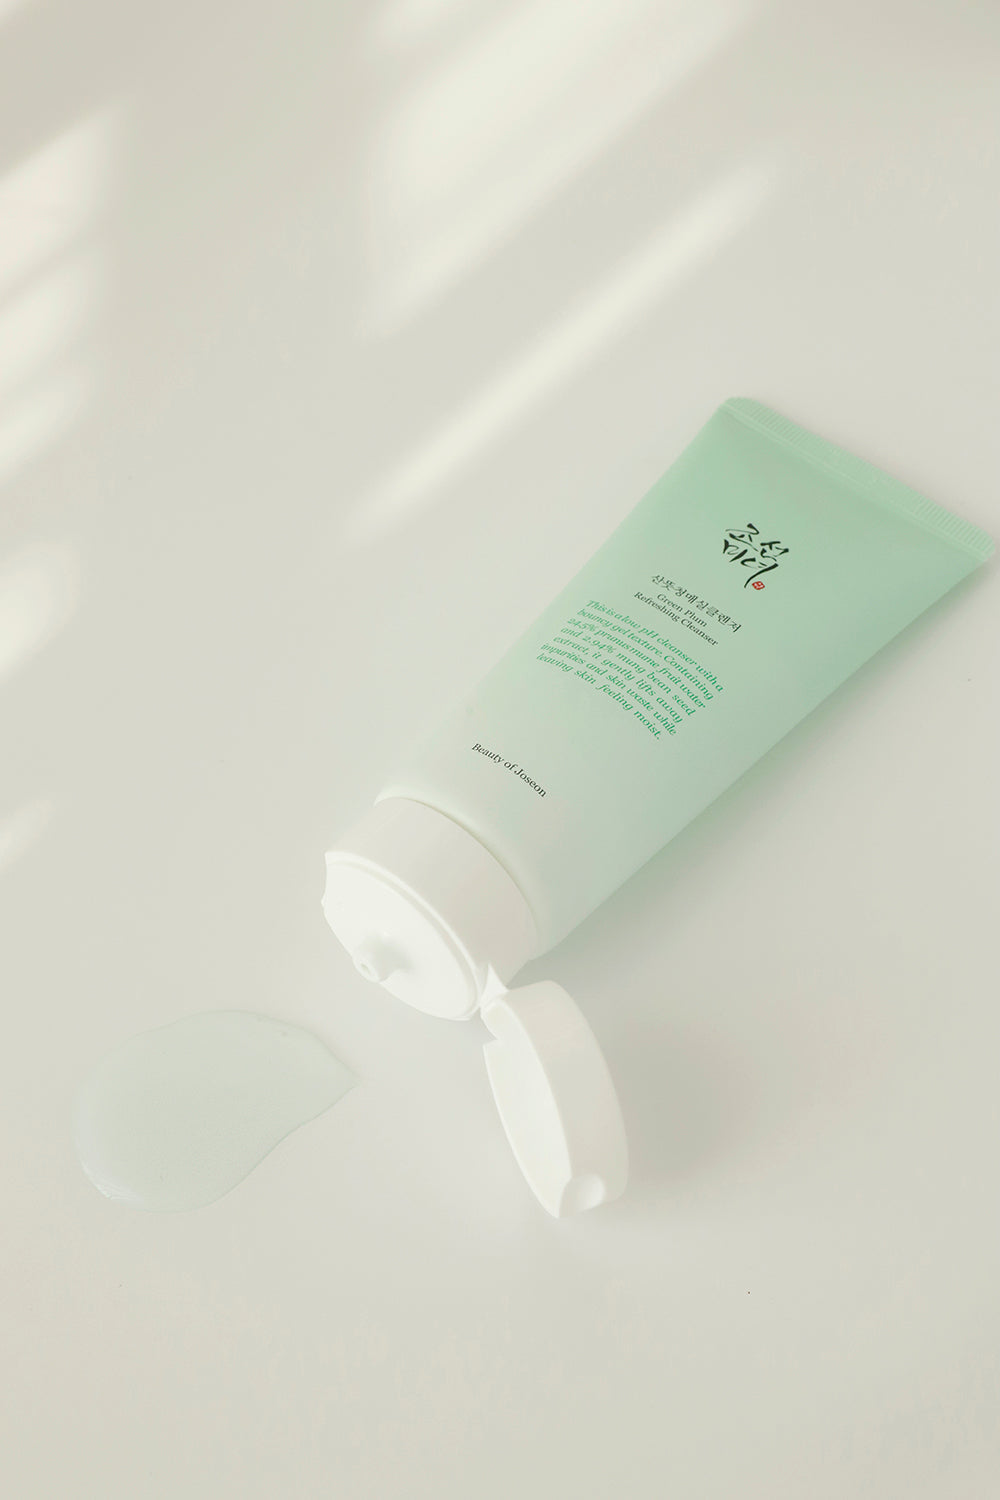 The Green Plum Refreshing Cleanser is a facial cleanser containing plant-derived extracts obtained from plum and mung bean seeds with a slightly acidic formula that helps to cleanse the face without damaging the skin&